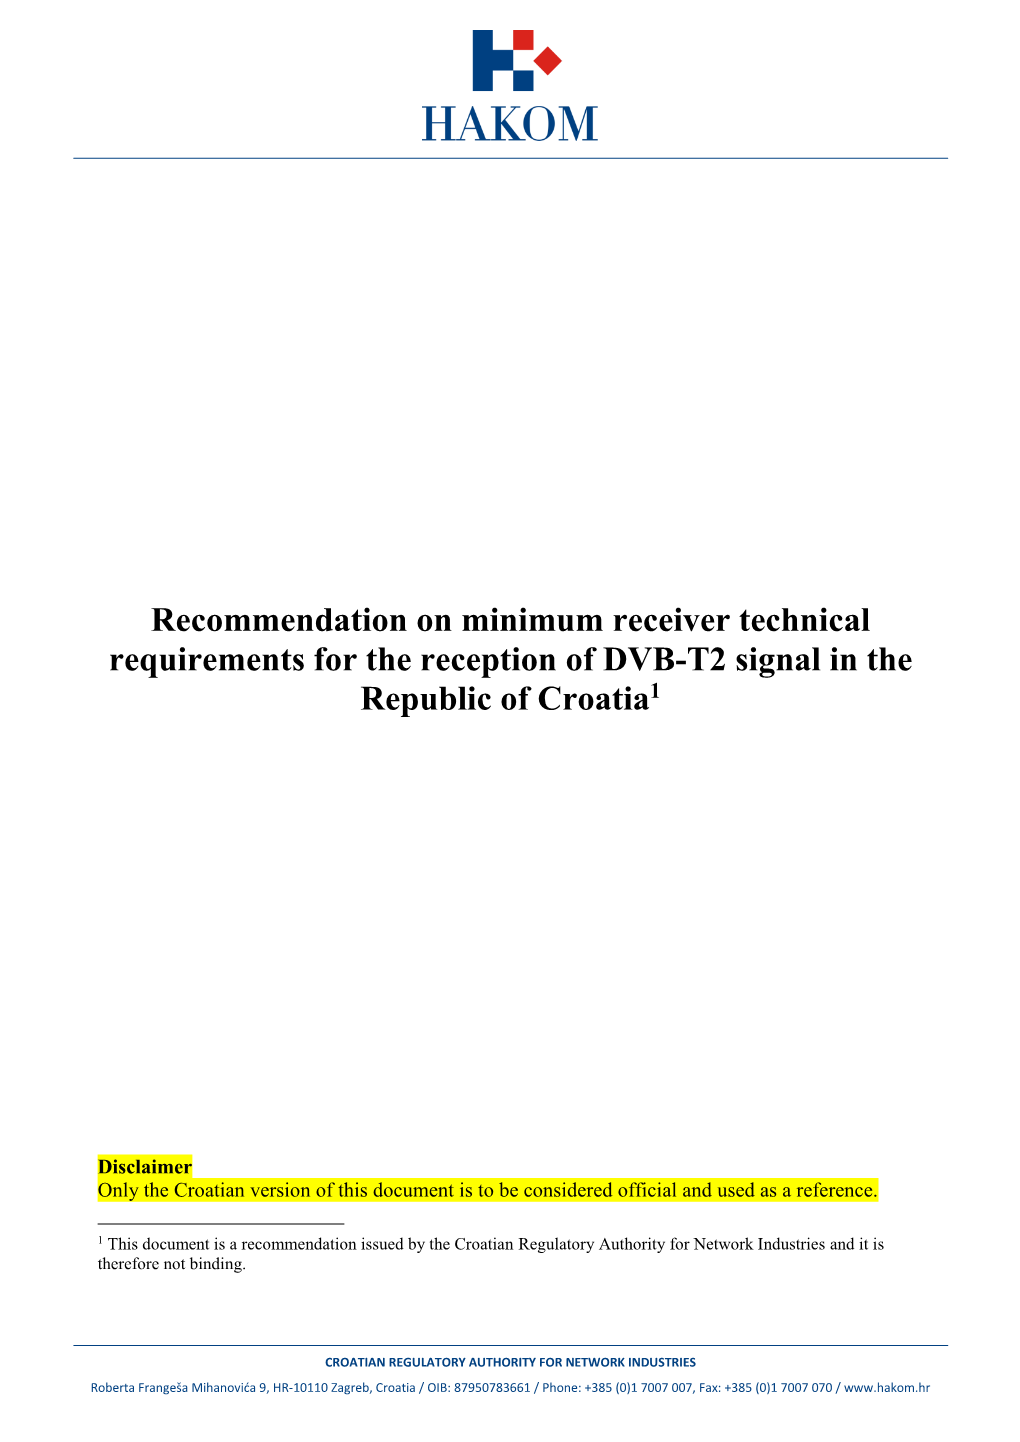 Recommendation on Minimum Receiver Technical Requirements for the Reception of DVB-T2 Signal in the Republic of Croatia1